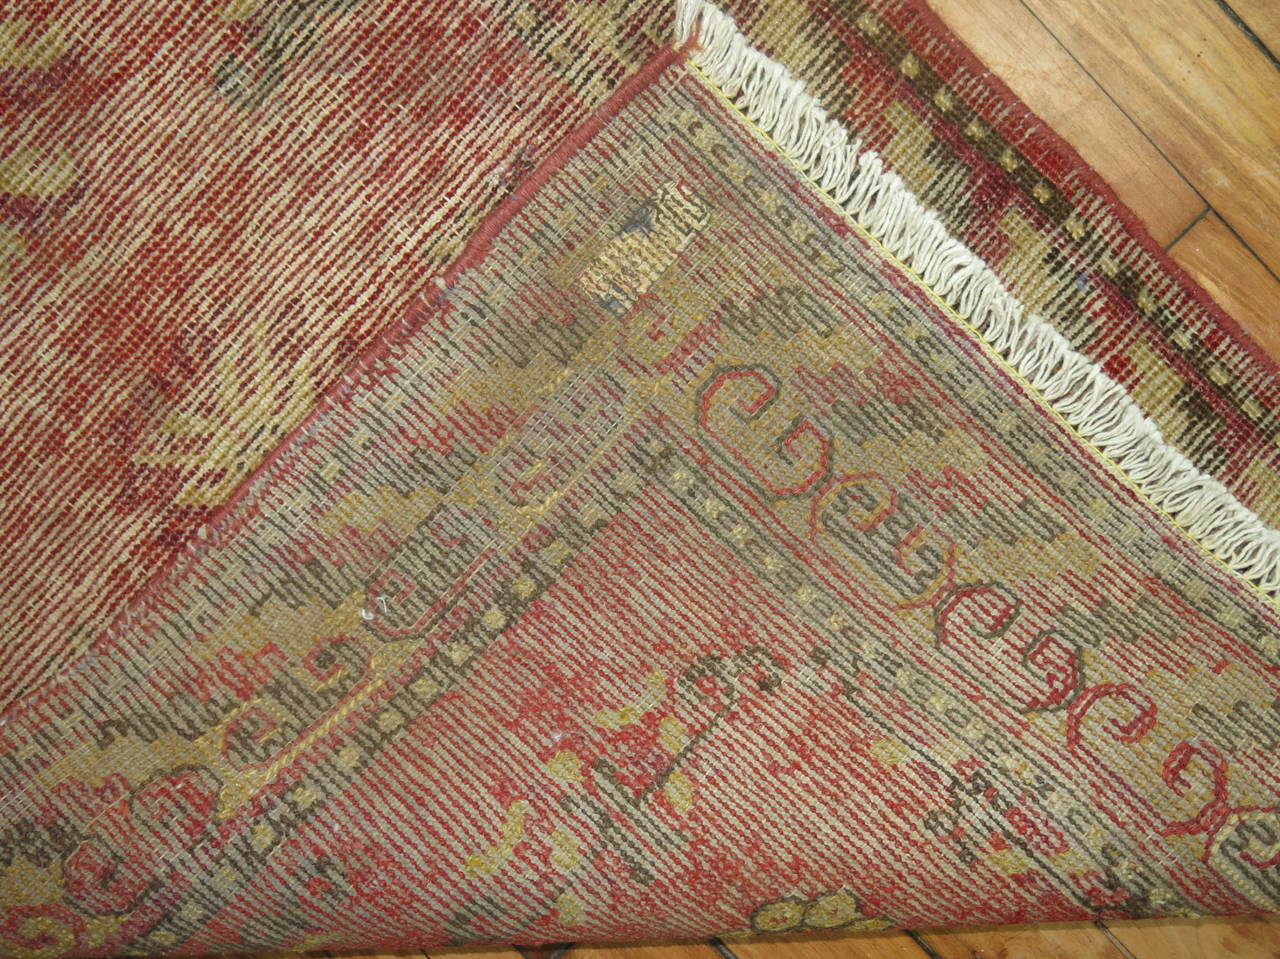 Rare size narrow khotan runner in faded chinese red